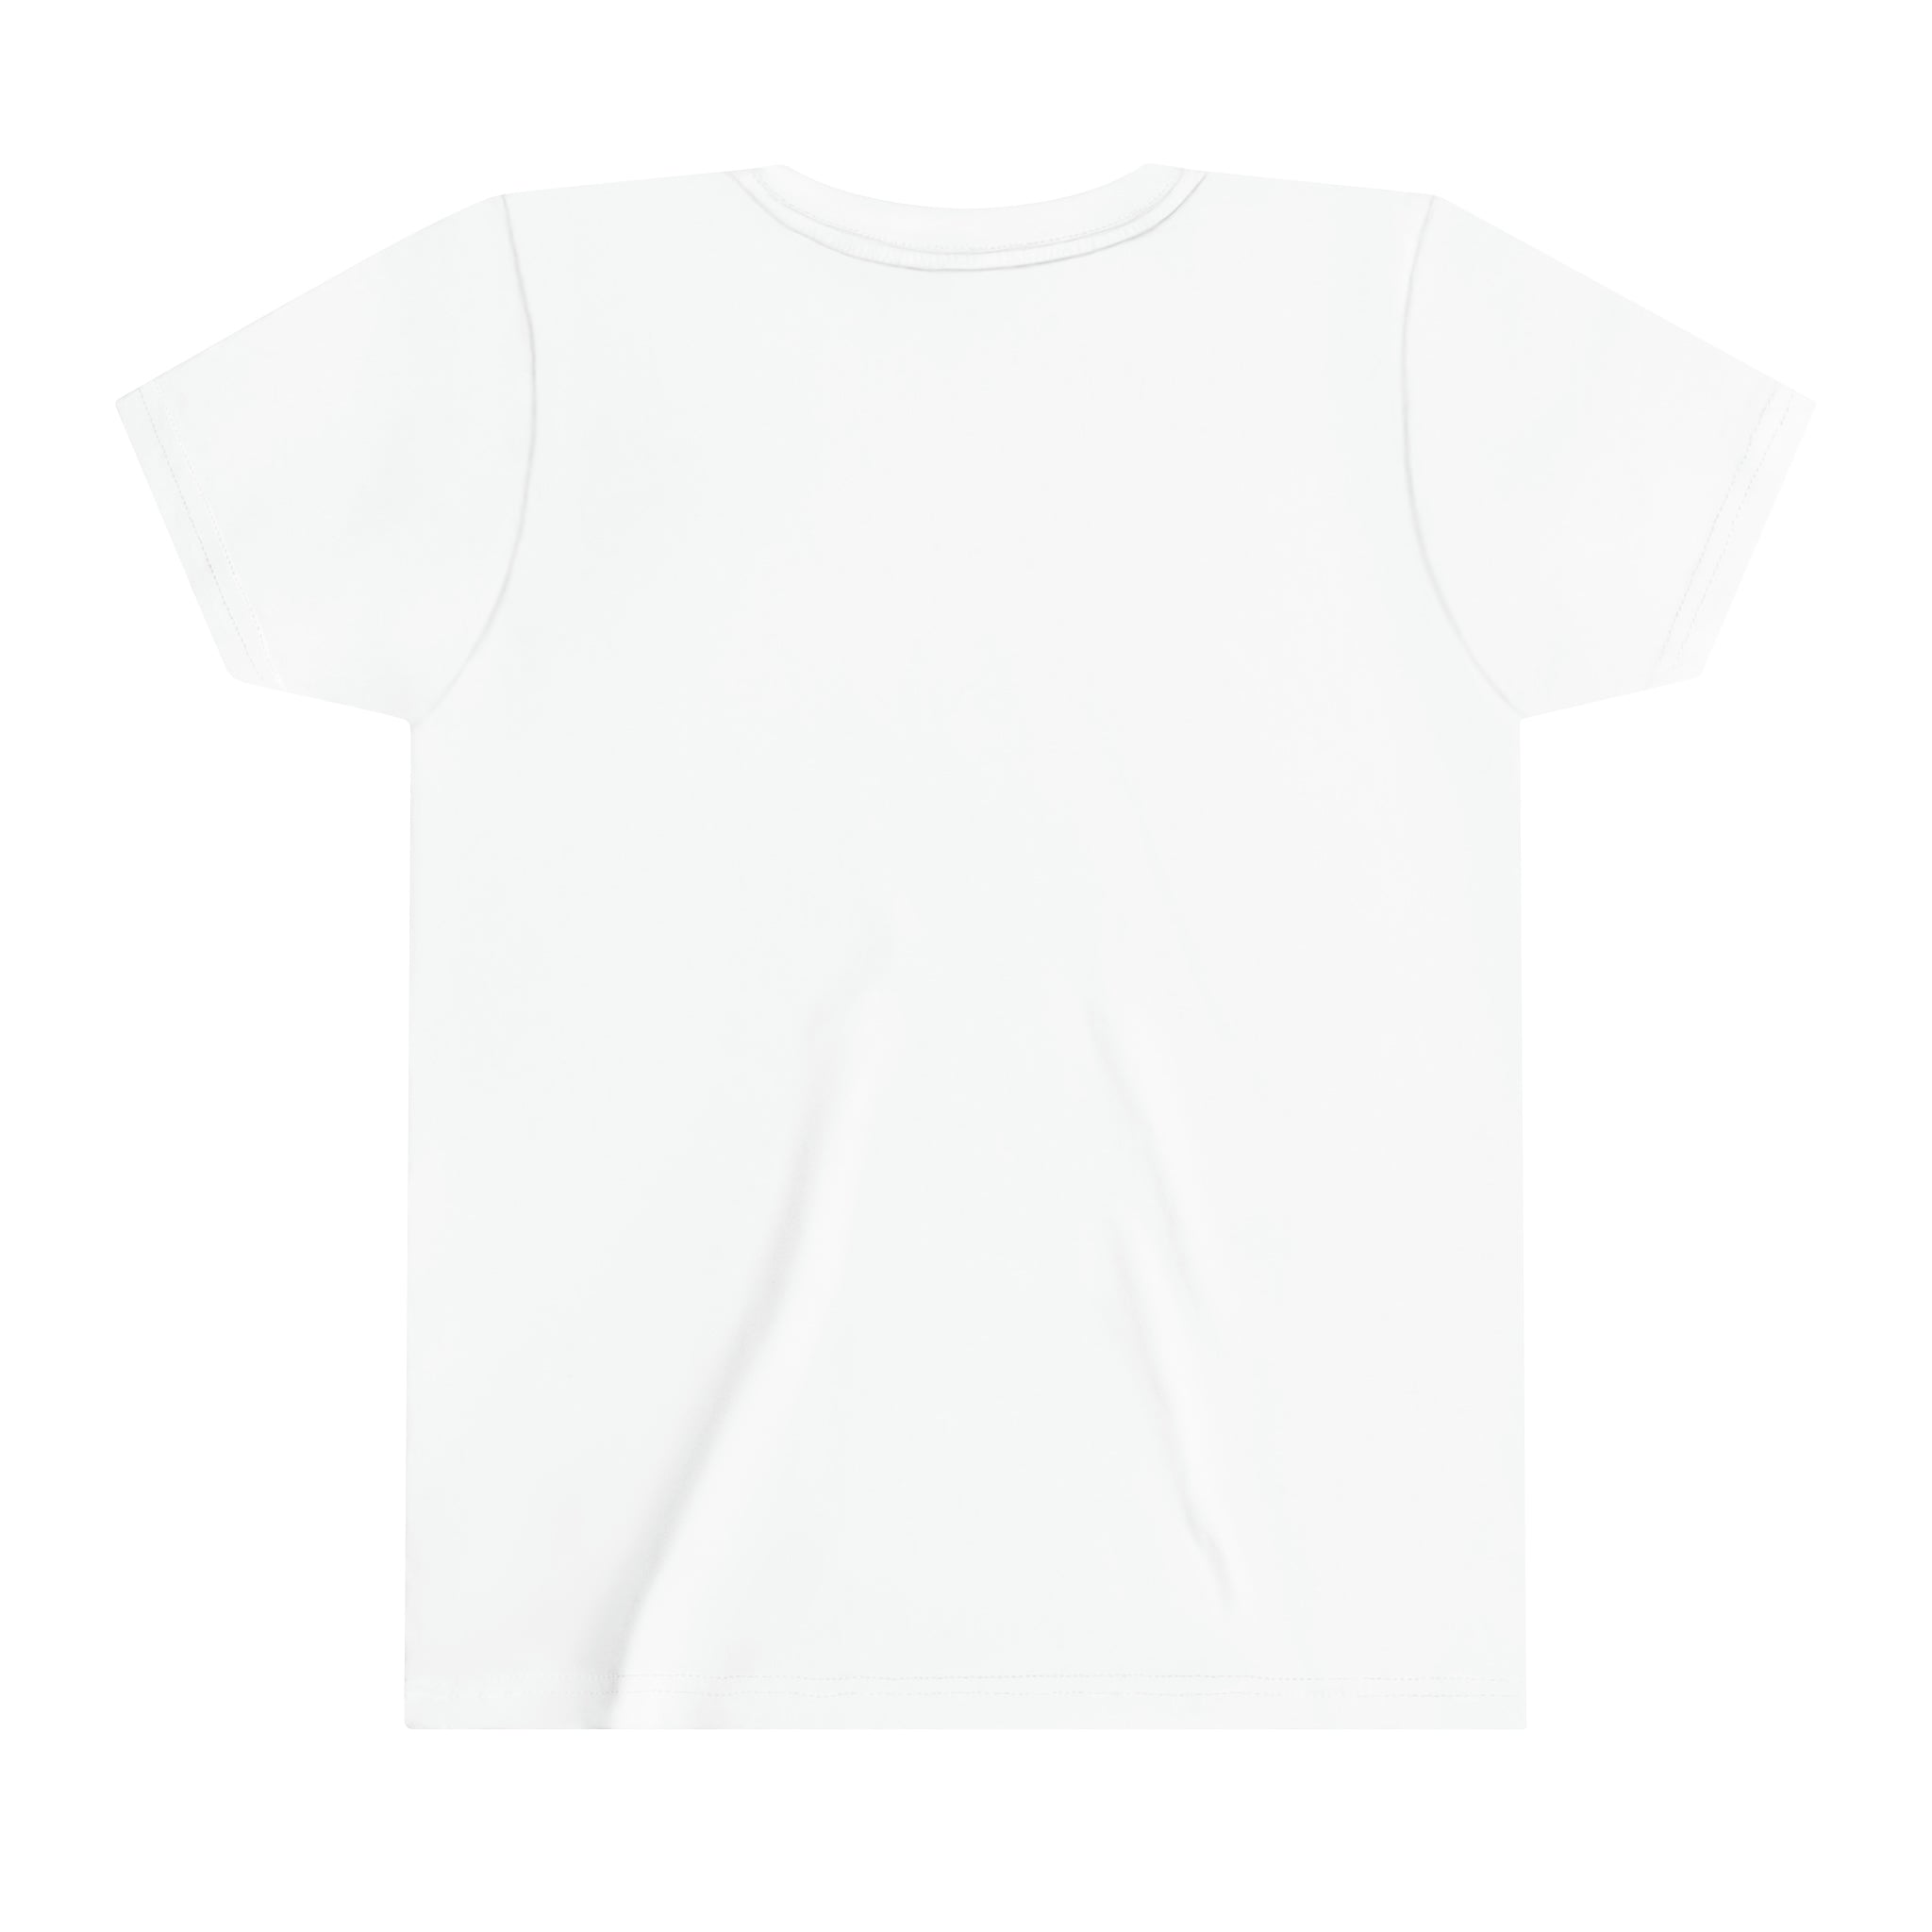 Live With Purpose Unisex Youth Short Sleeve Tee